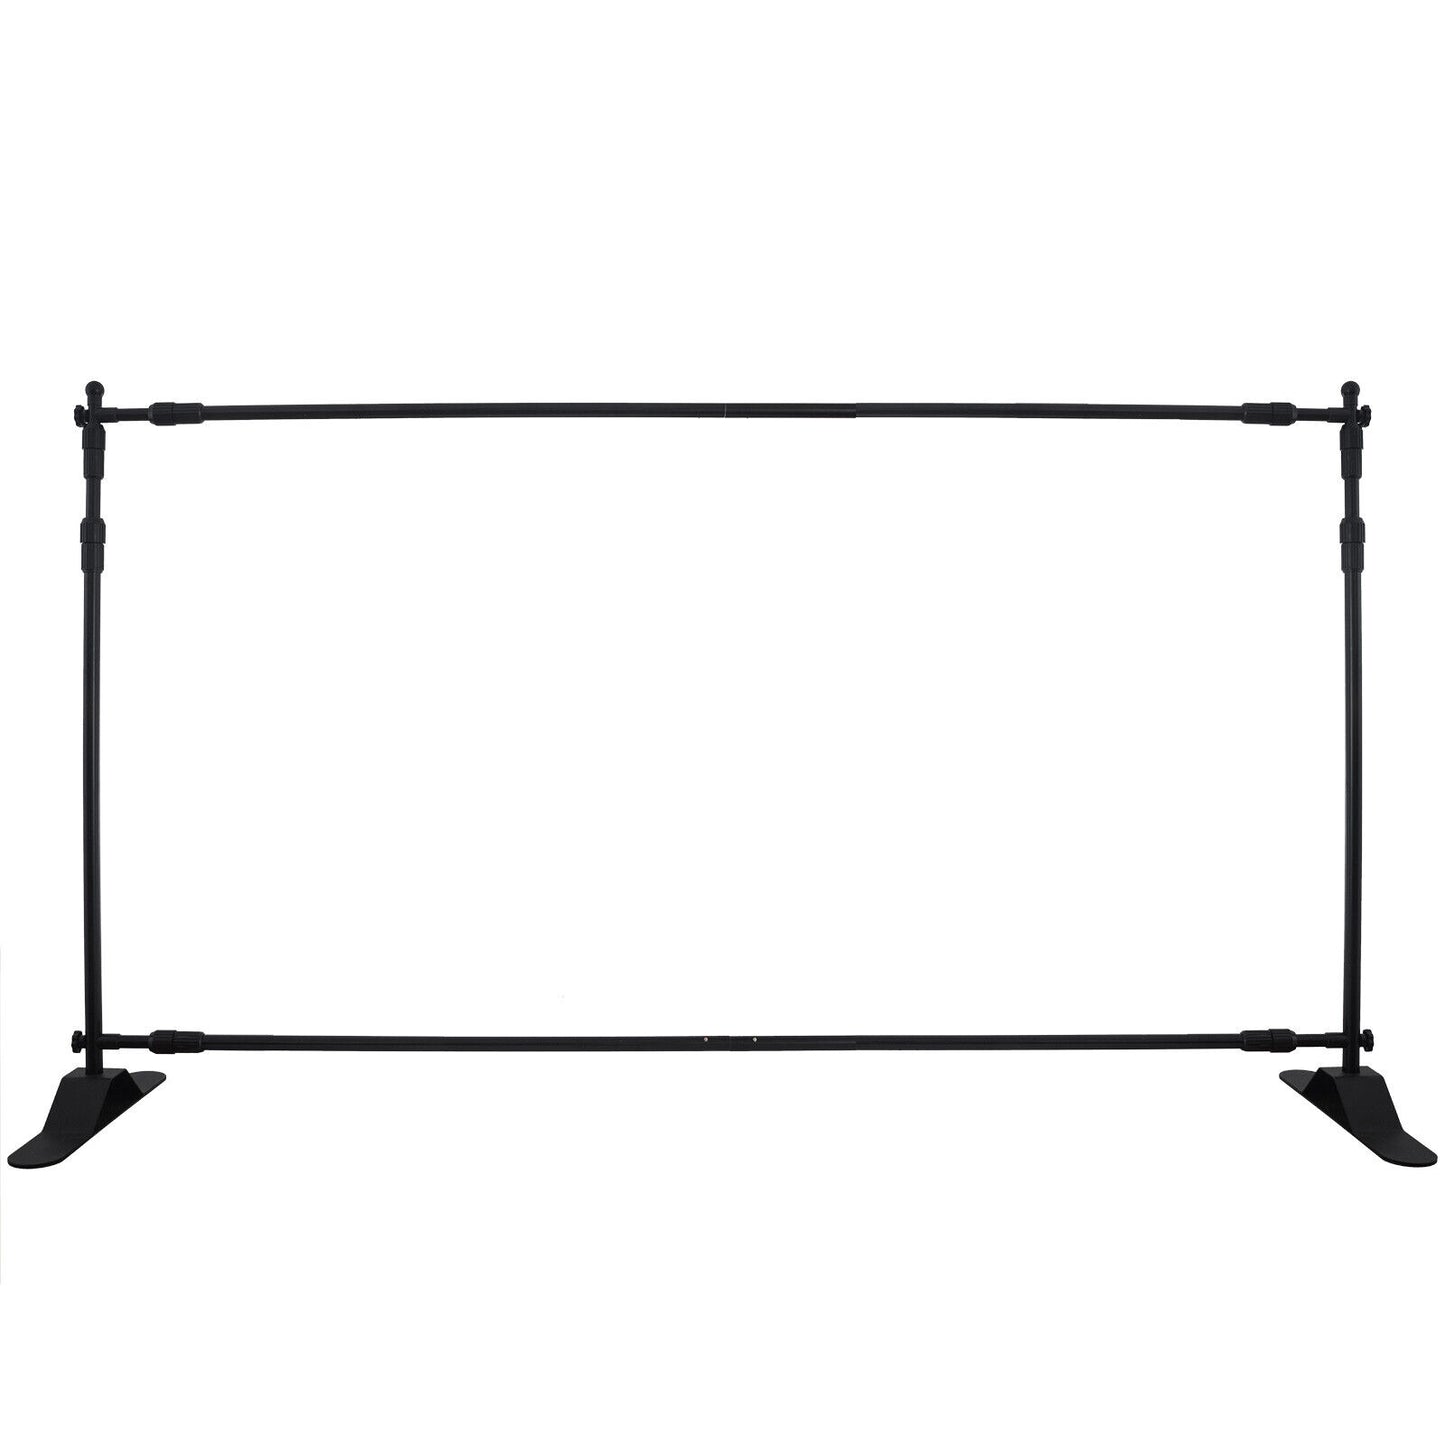 8'x10' Step and Repeat Banner Stand Adjustable Telescopic Trade Show Backdrop US